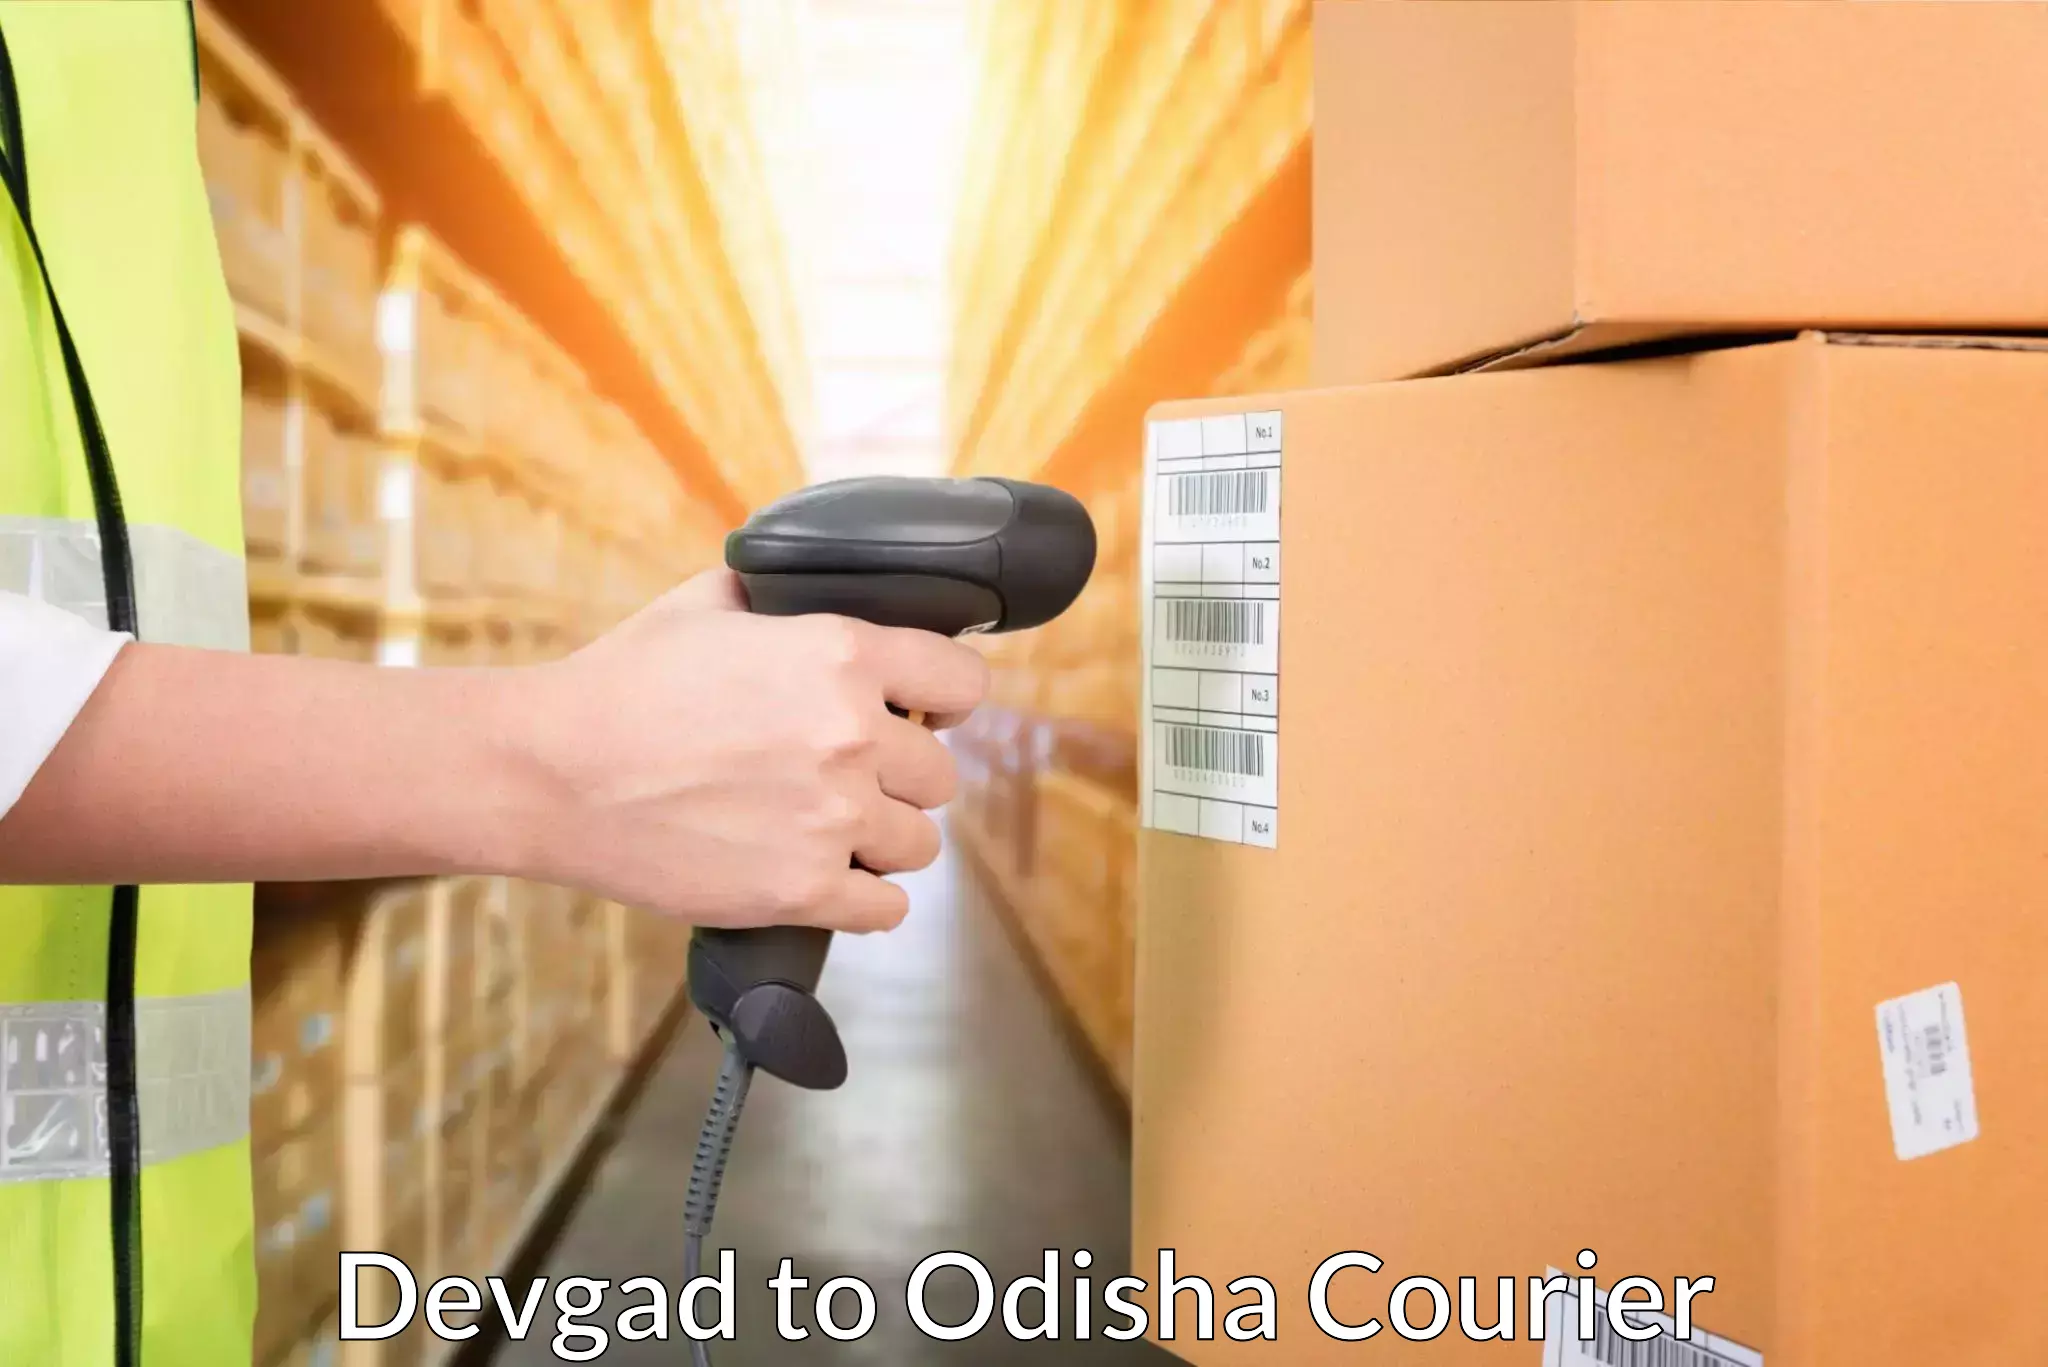 State-of-the-art courier technology Devgad to Telkoi